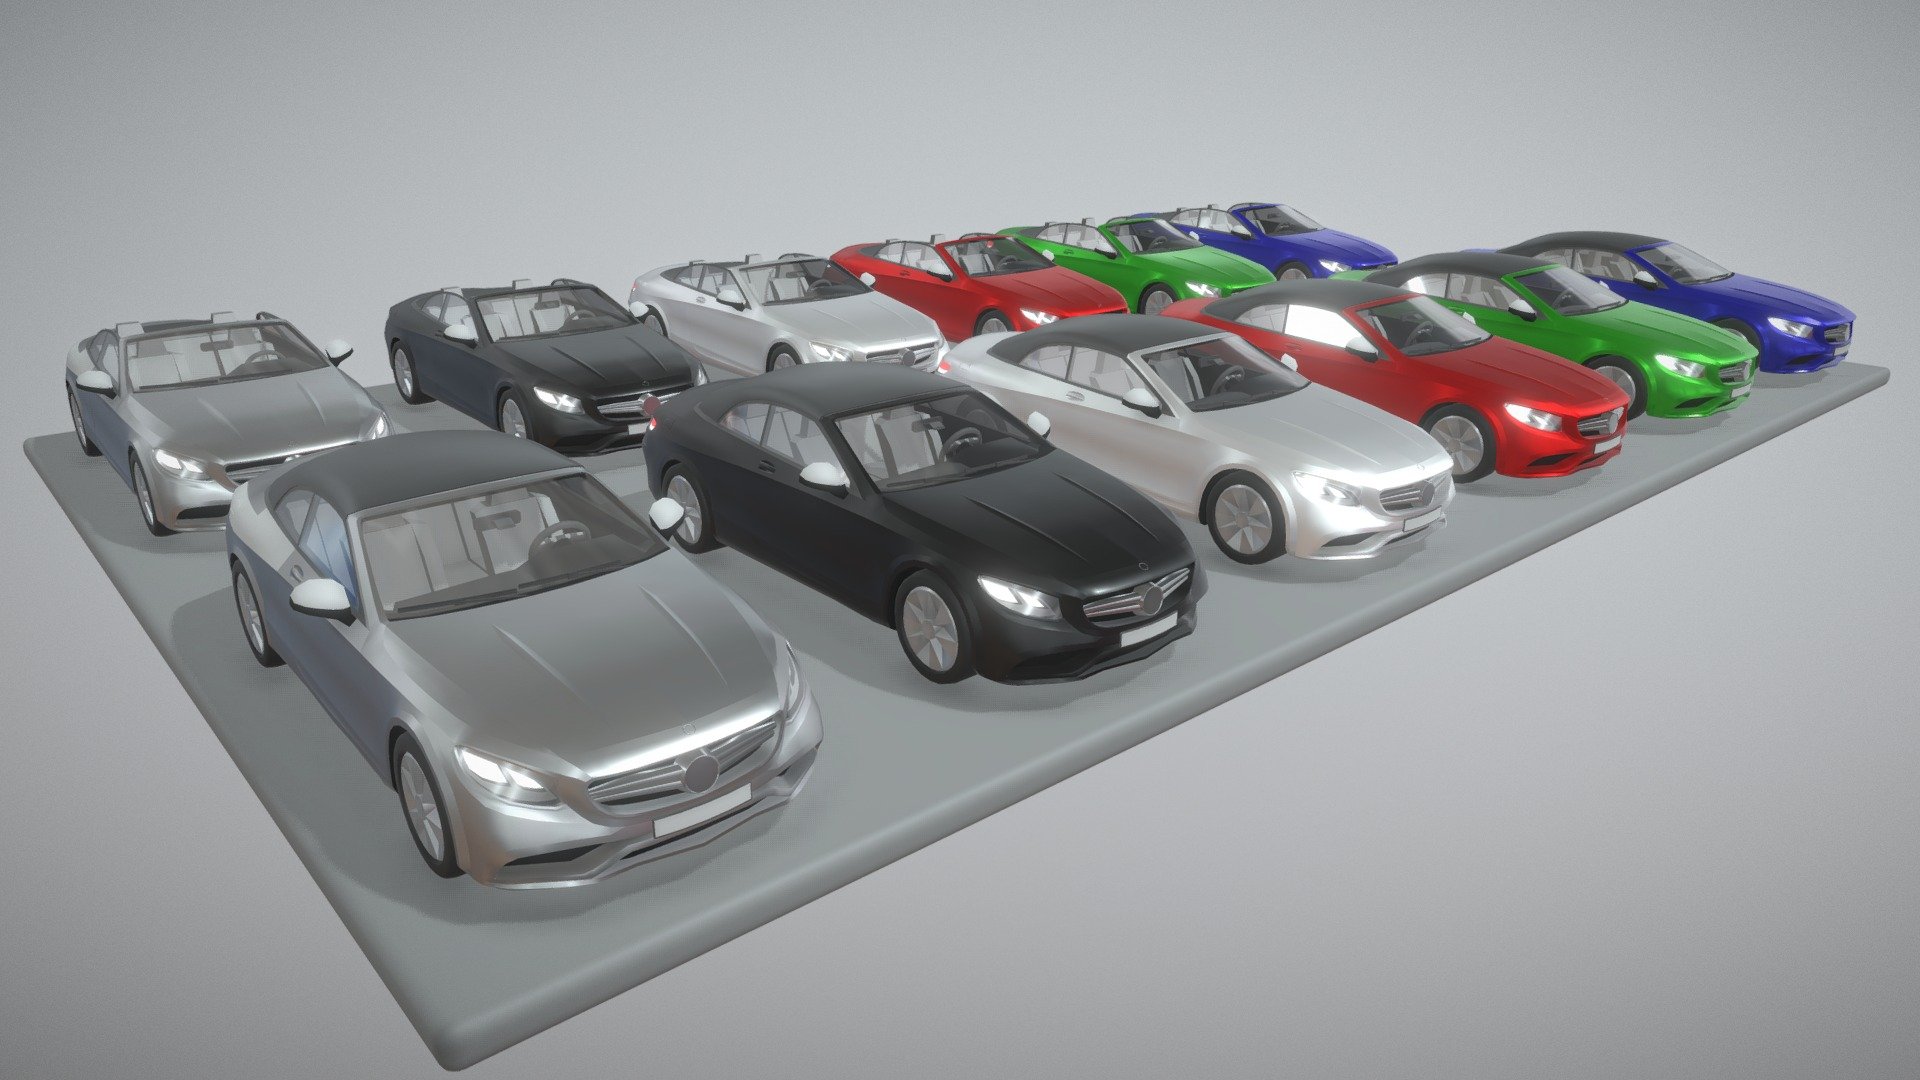 3D preview of our A vehicle types from the car-module 2.

As standard and cabriolet version in different colors.



3D-Vorschau von unseren A Fahrzeugtypen aus dem Auto-Module 2.

Als Standard- und Cabrio-Version in verschieden Farben.



Alle Fahrzeugtypen im Überblick (Auto-module 2)

An overview of all vehicle types (car-module 2)





3D-Modelle und Texturen wurden erstellet von 3D-Haupt in Blender 3d model